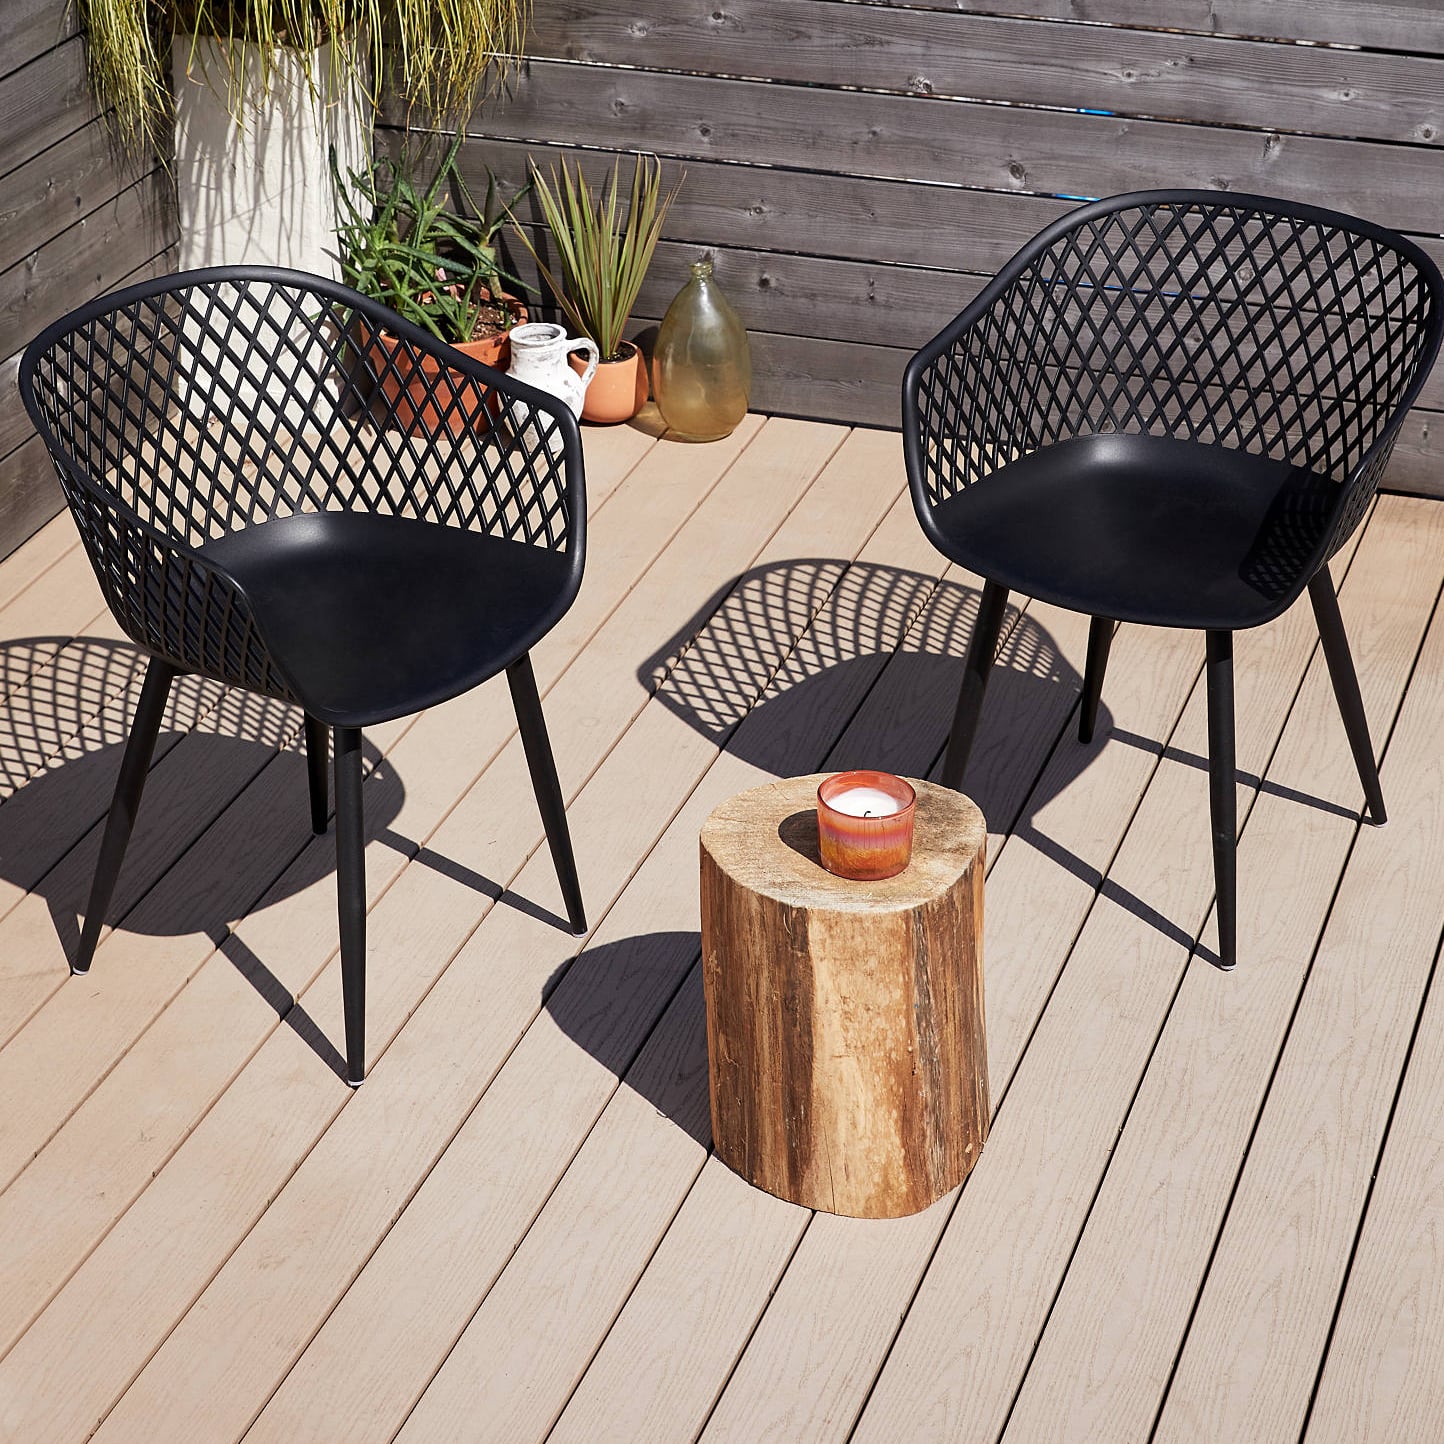 Best Outdoor Furniture 2021 - Where to Buy Patio Furniture For Any Budget